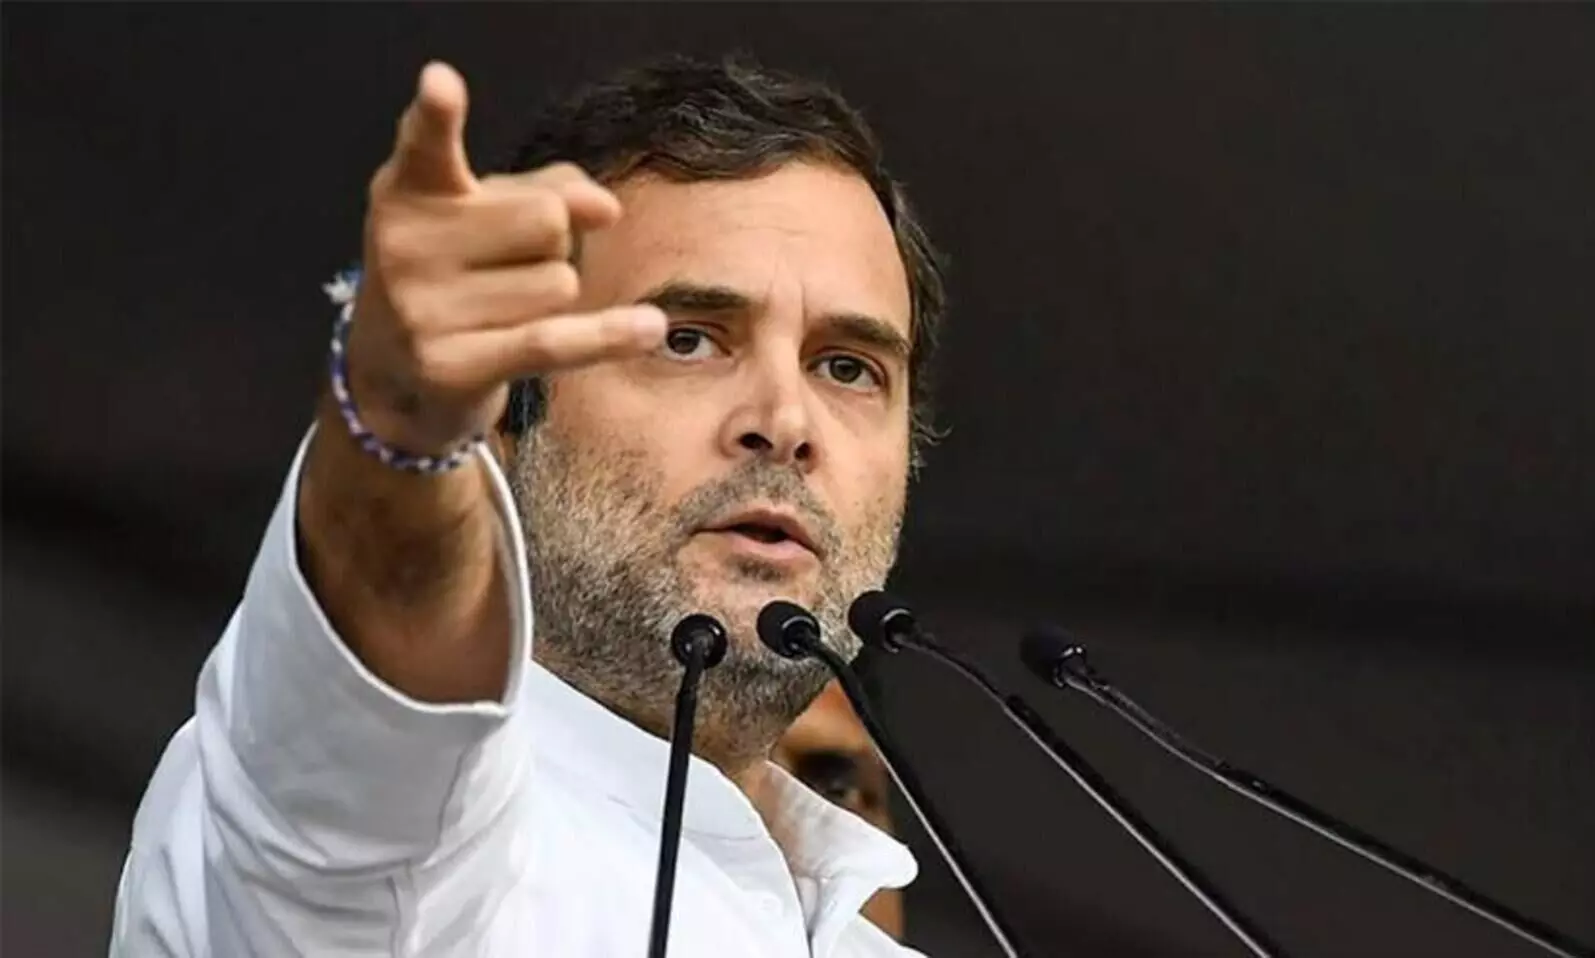 Rahul Gandhi says his phone is definitely tapped but he is not a target